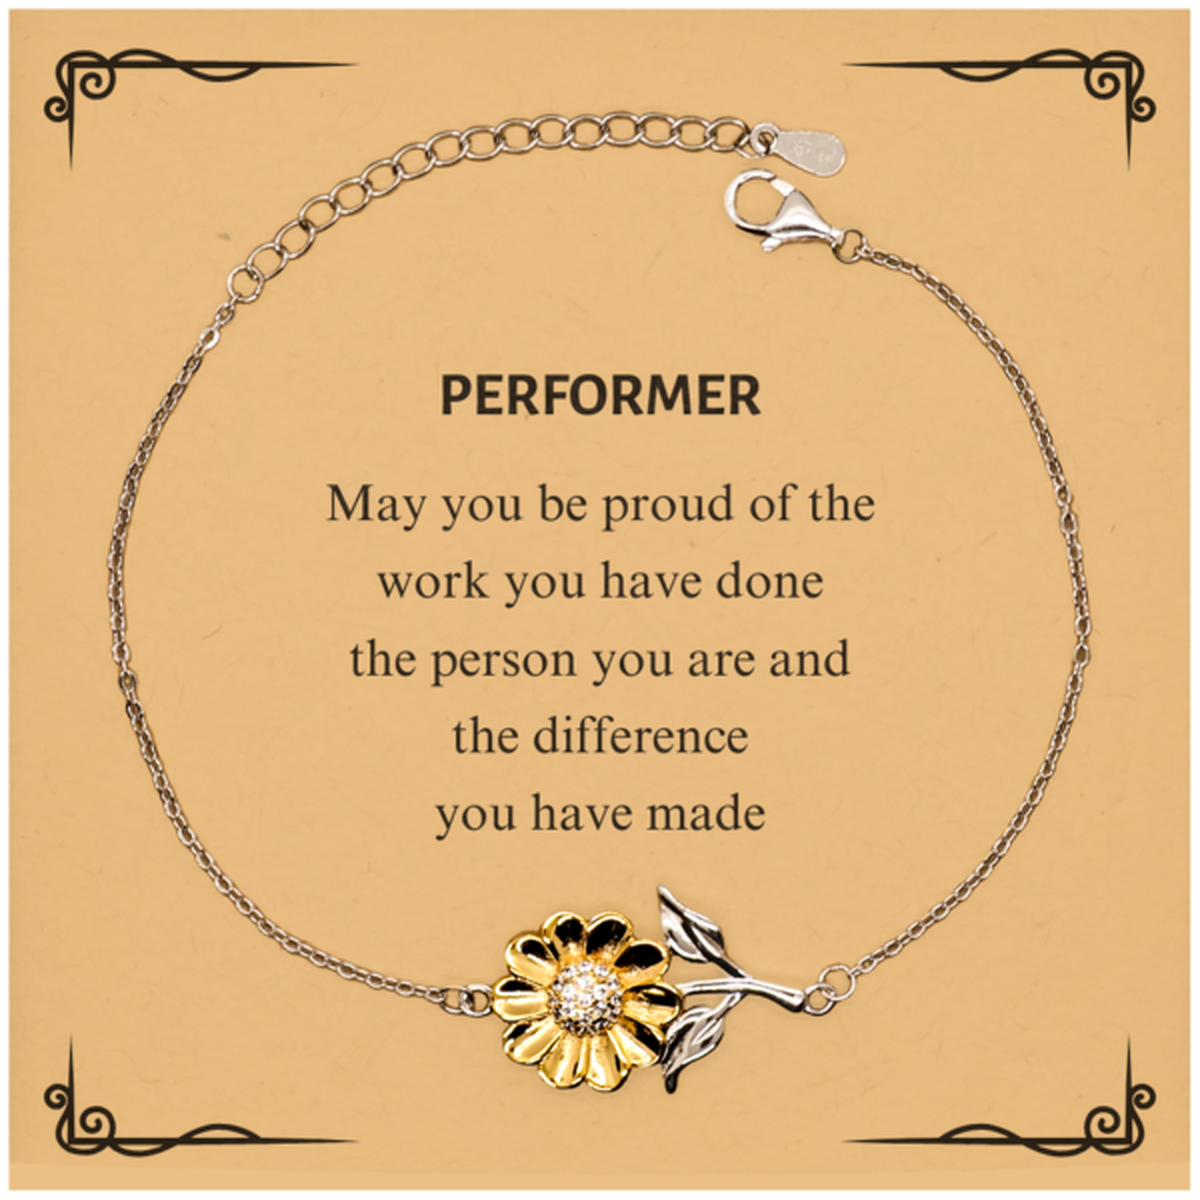 Performer May you be proud of the work you have done, Retirement Performer Sunflower Bracelet for Colleague Appreciation Gifts Amazing for Performer